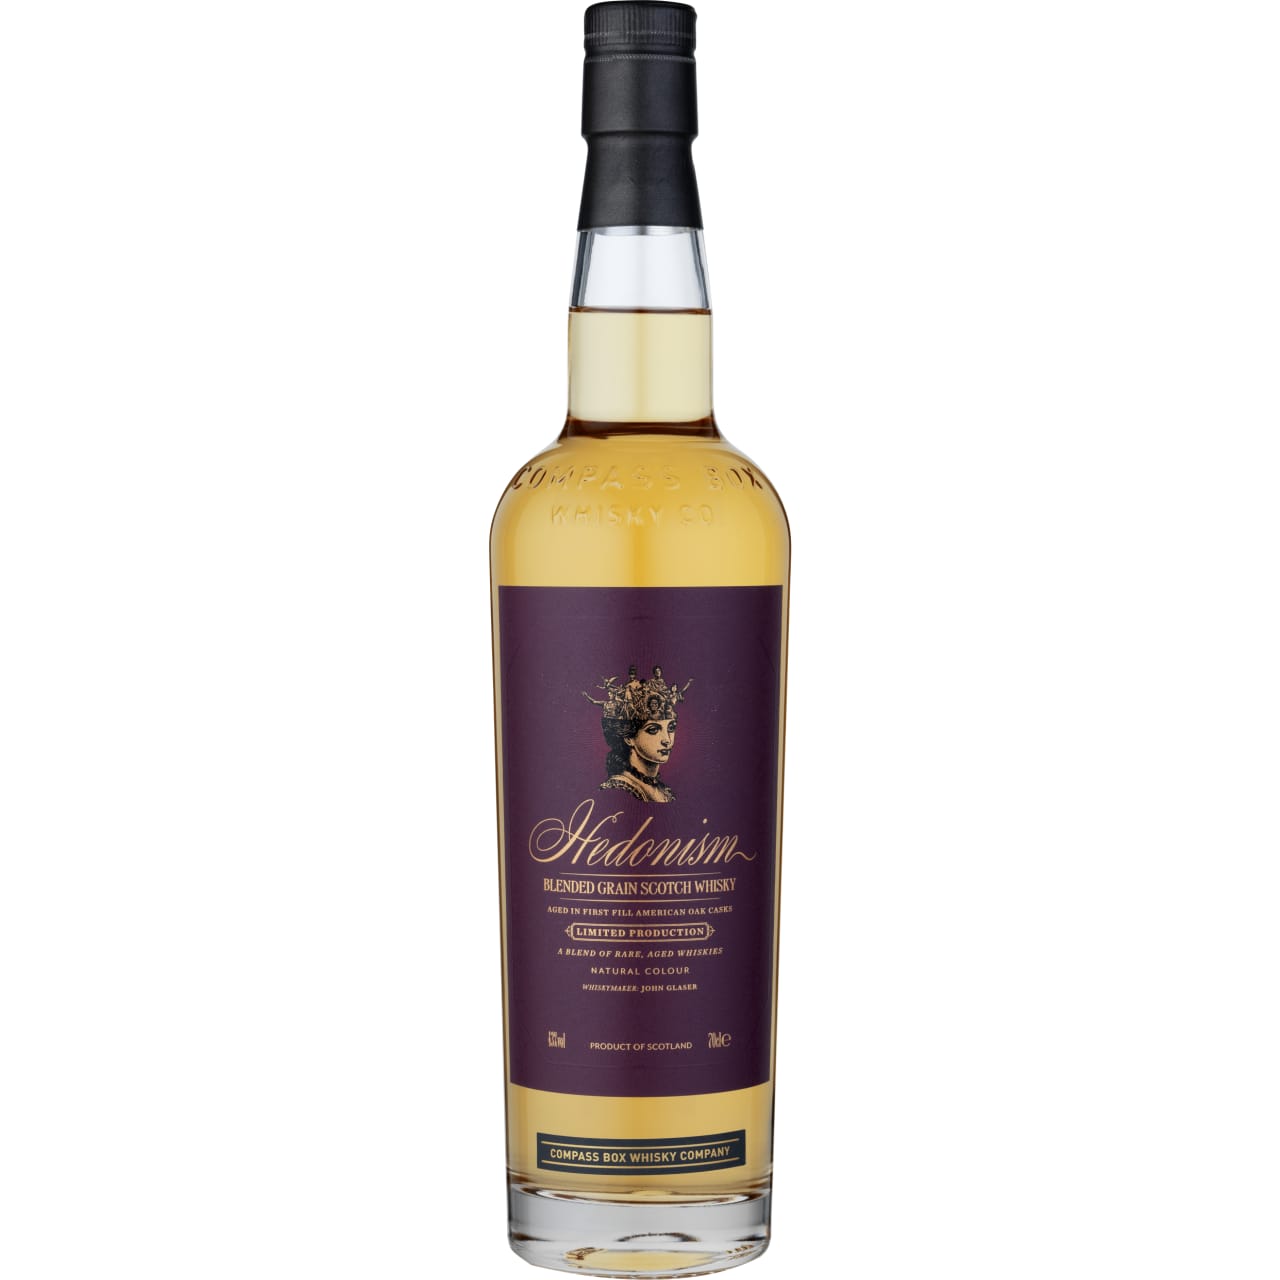 A unique and award-winning Blended Grain Scotch Whisky.